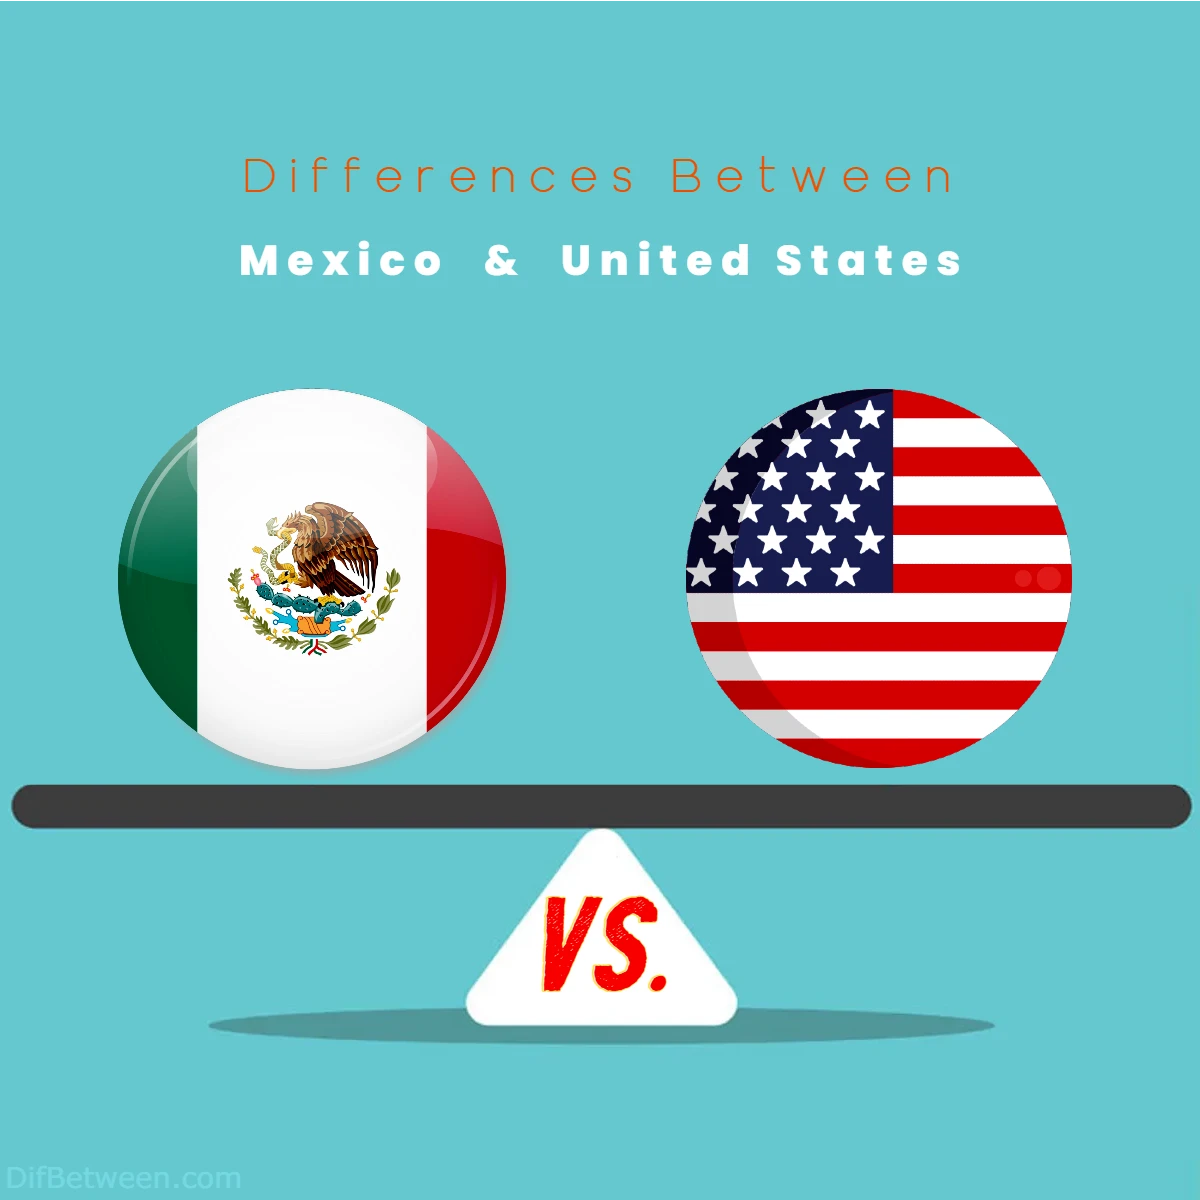 Differences Between Mexico vs United States